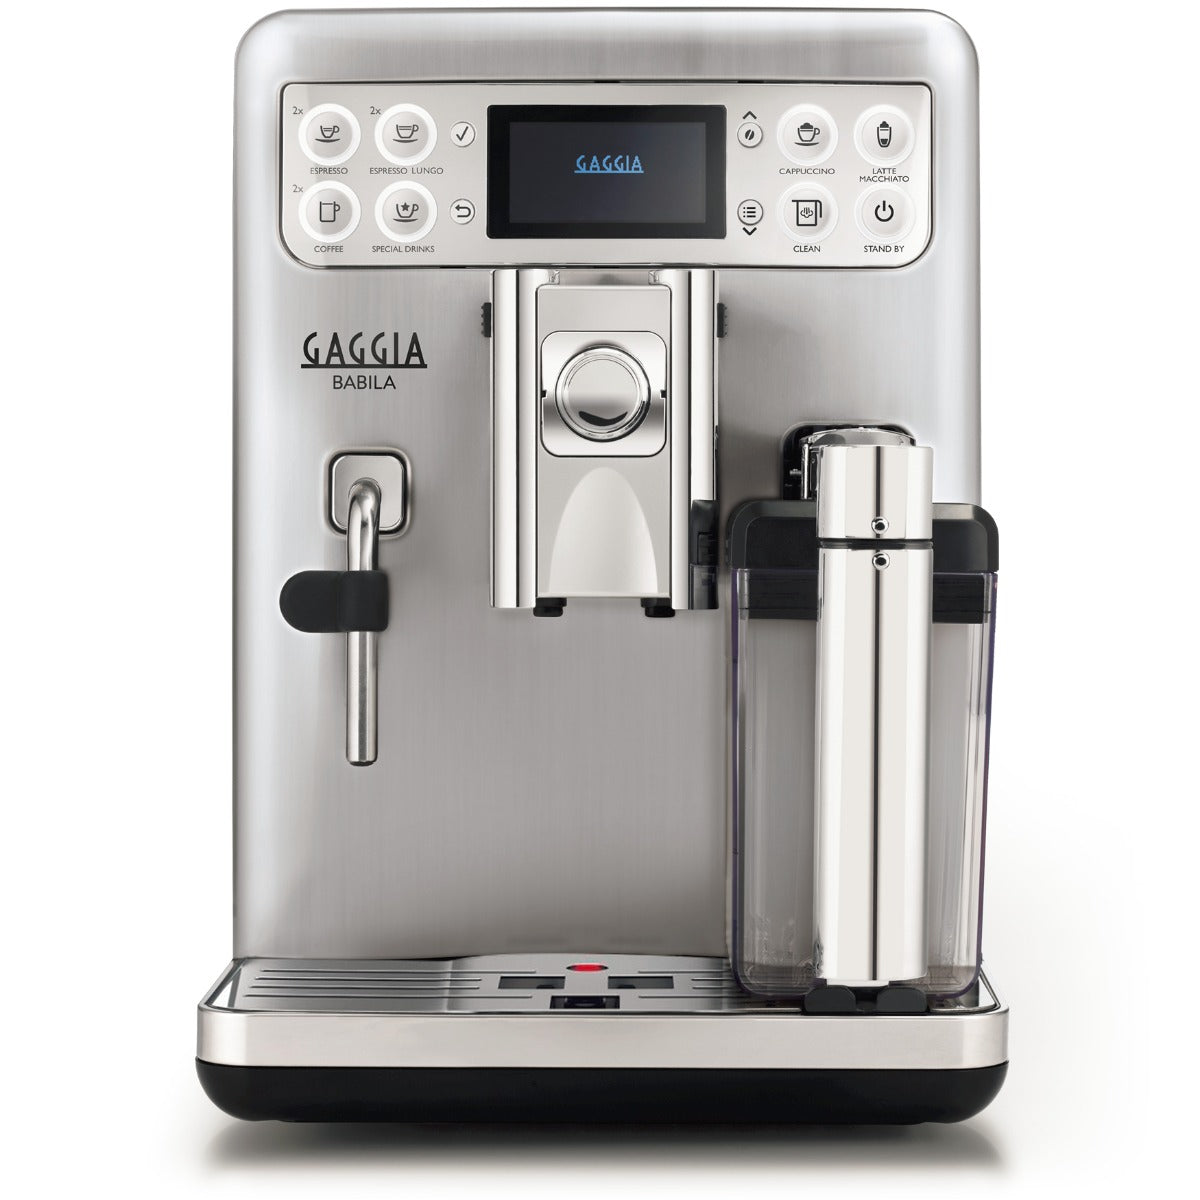 14 Inch Indian Espresso Coffee Machine Gas And Electric